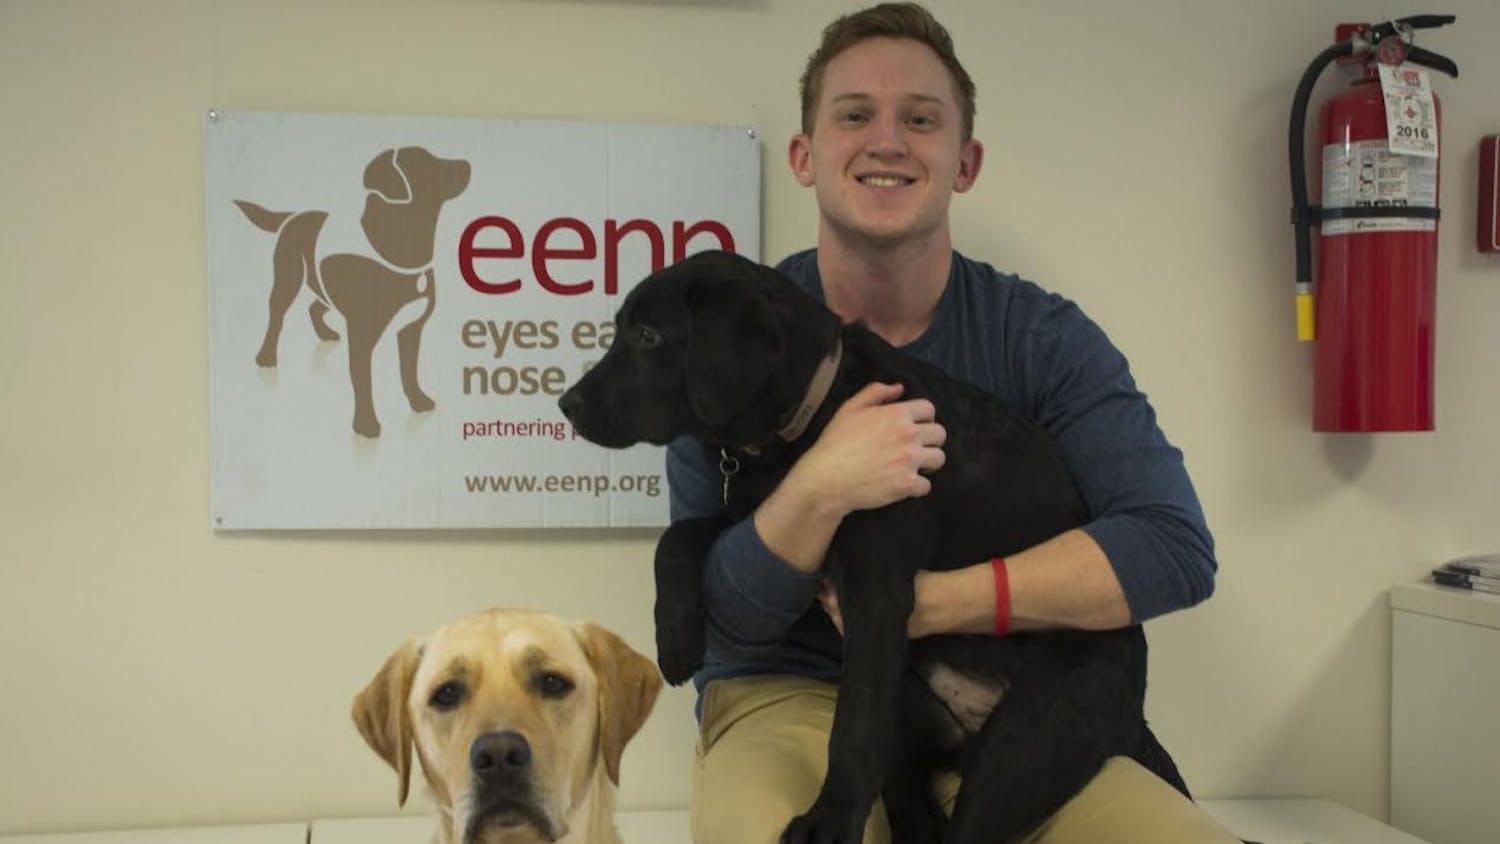 Trevor, a graduate student, is in the process of fundraising to get a medical alert dog for his diabetes.